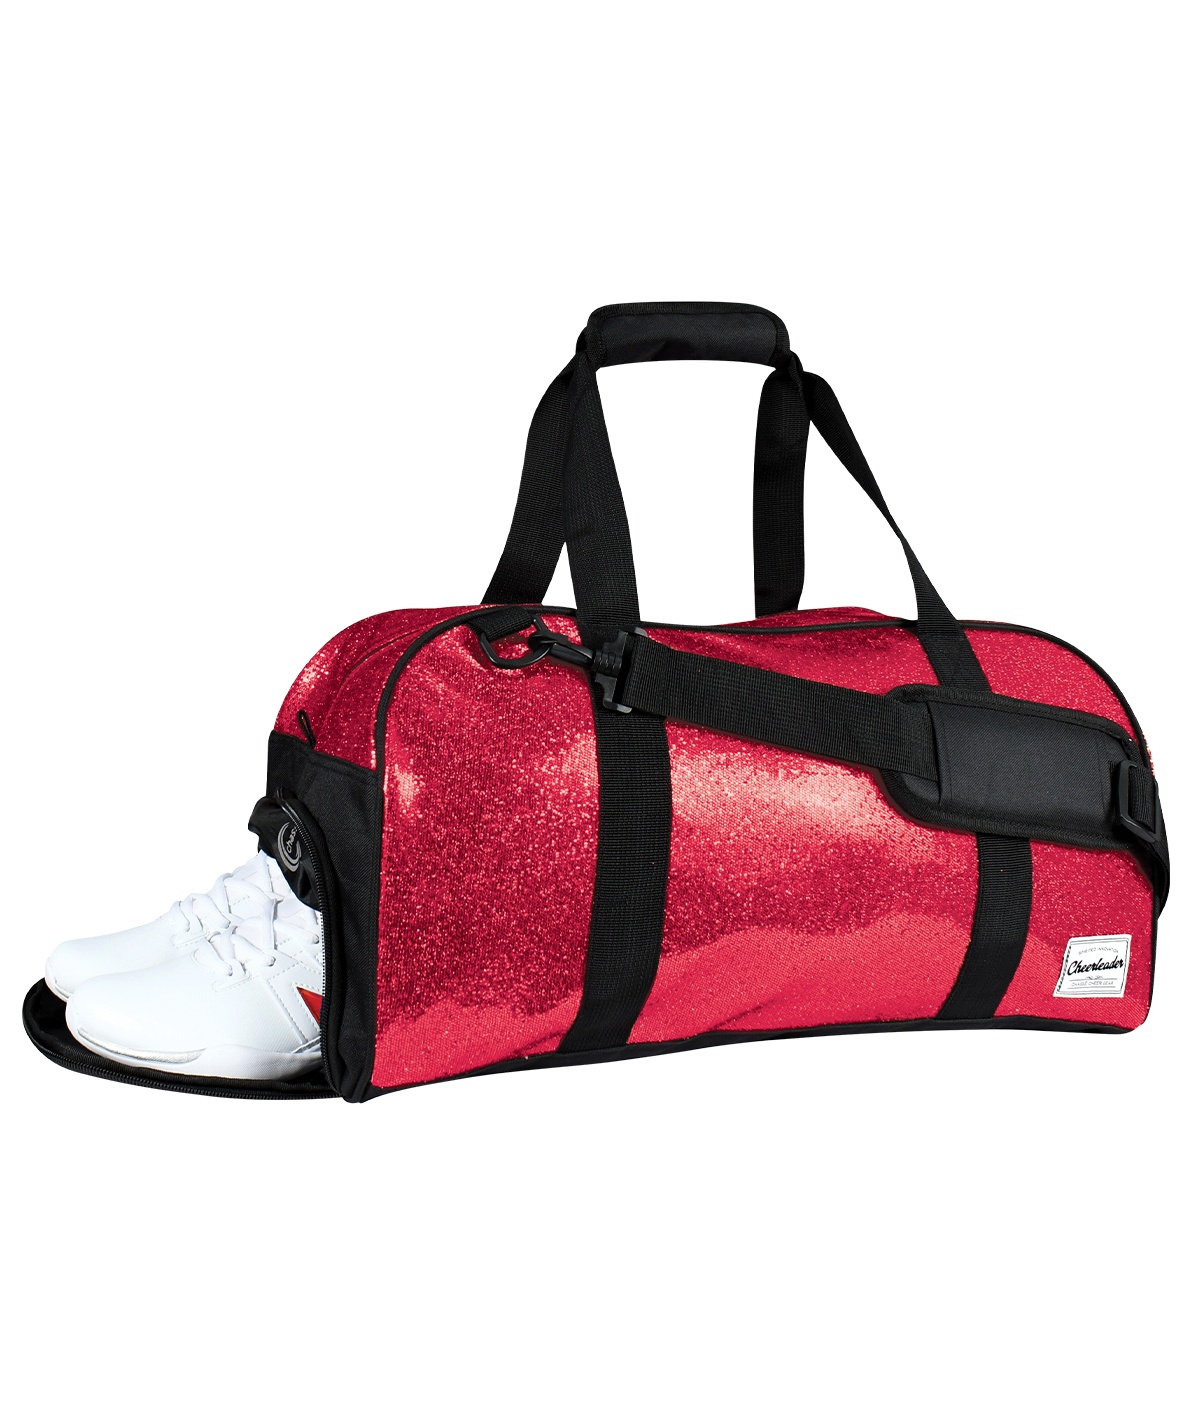 Chasse Shimmer Duffle Bag